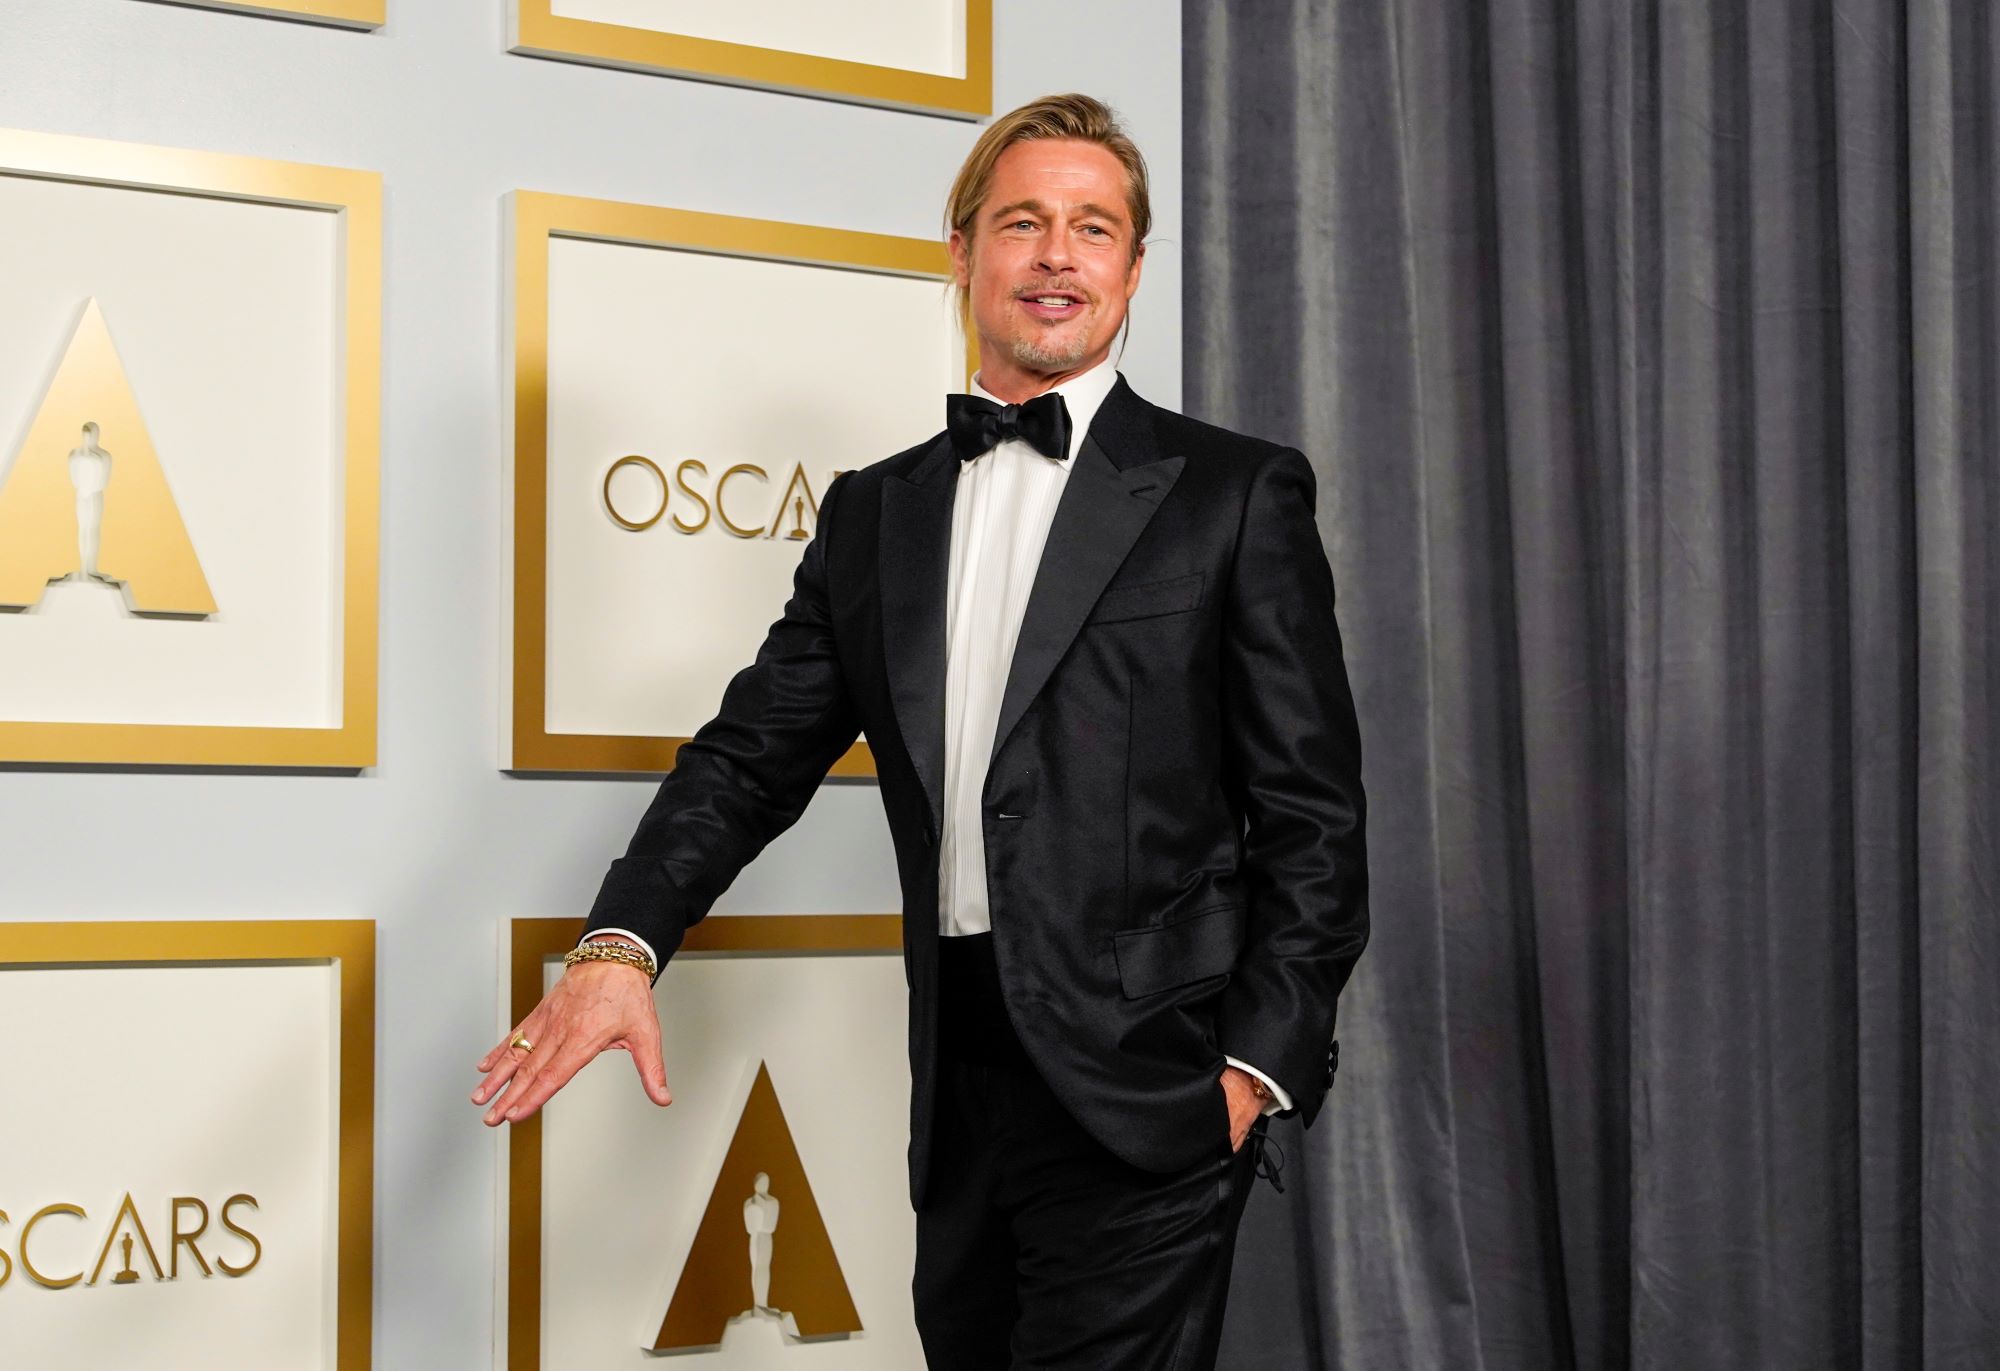 Brad Pitt walking in a black suit, white button up shirt and bow tie in front of a grey backdrop with gold references to the Oscars on it.